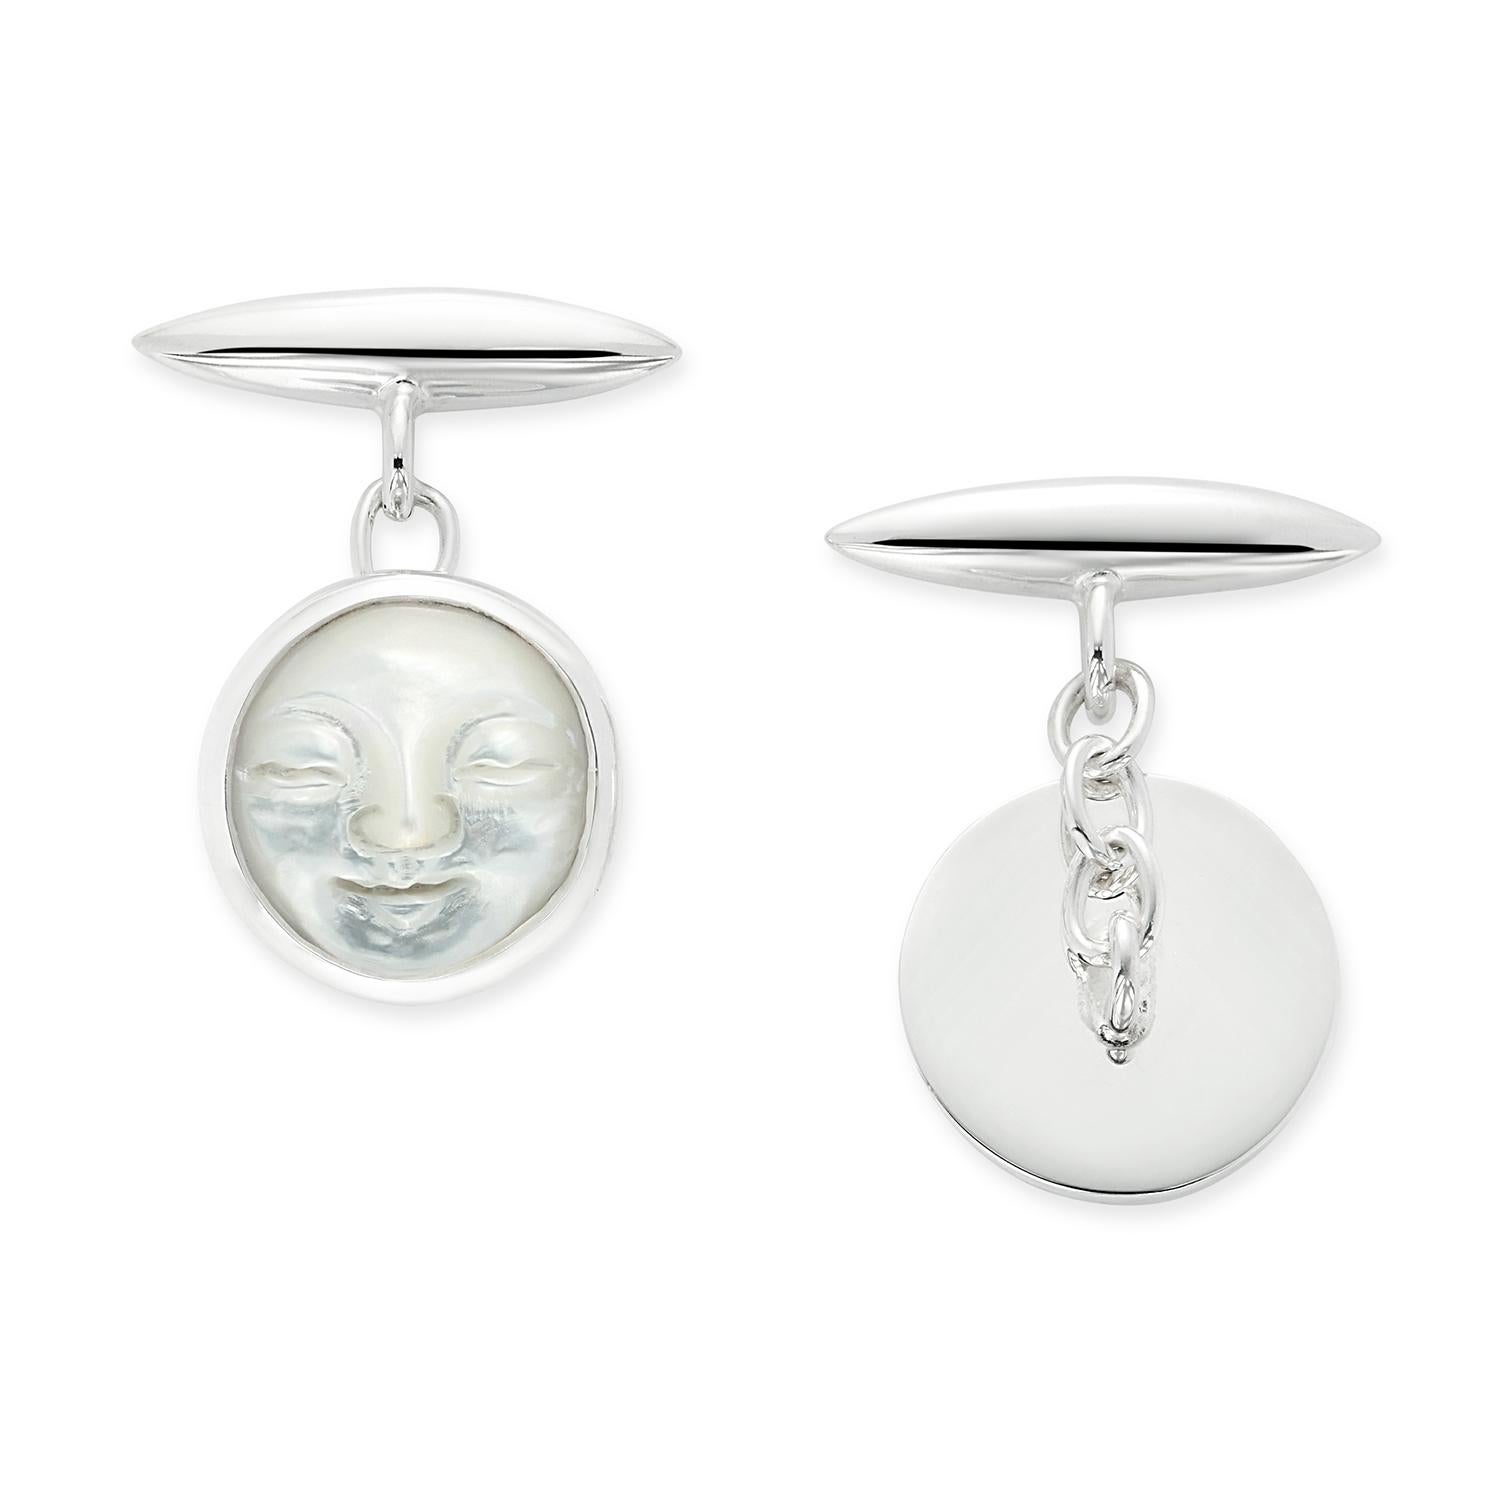 A unique pair of carved, mother of pearl, moon face cufflinks. Set in sterling silver with chain links. Perfect for weddings and special occasions. Hand made in London by master craftsmen. These hand carved round moon faces will add style to any